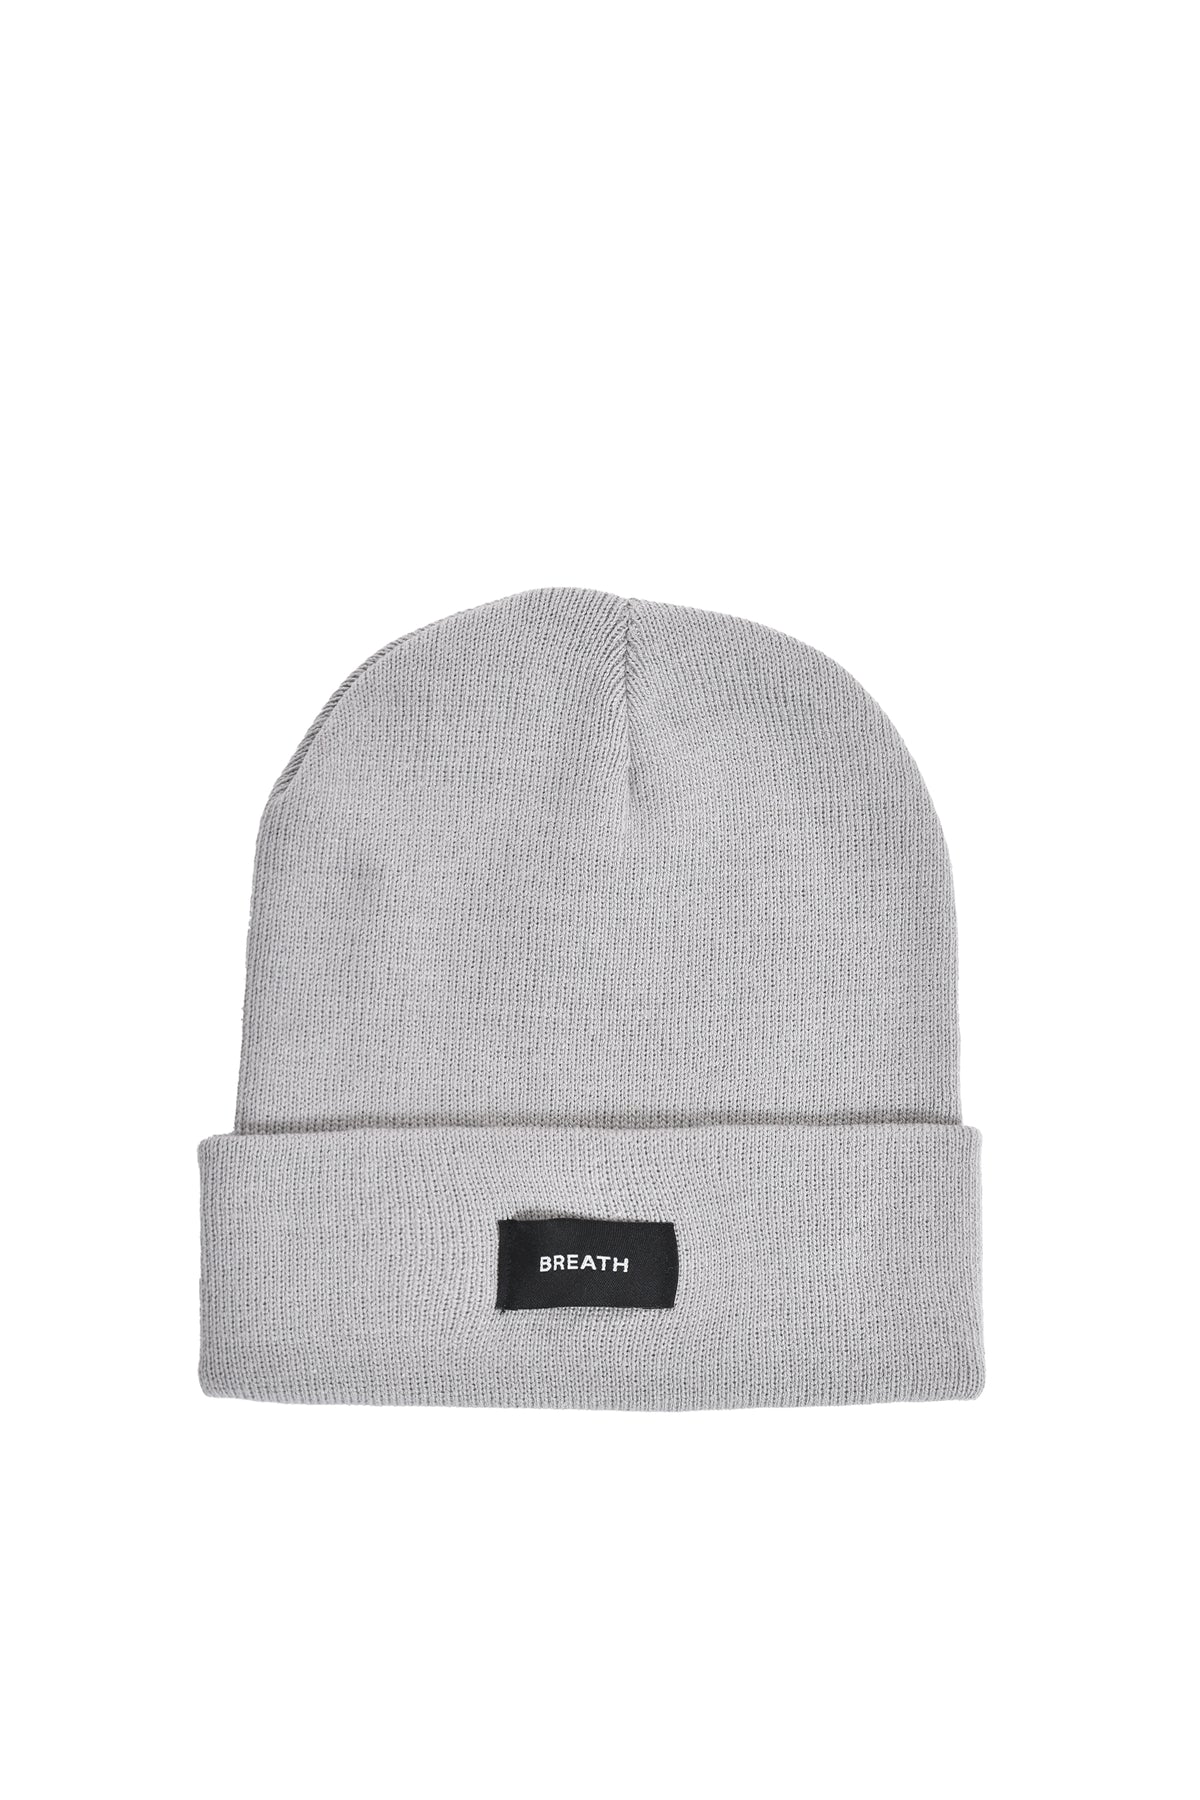 BREATH EMBROIDERY KNIT CAP / GRY